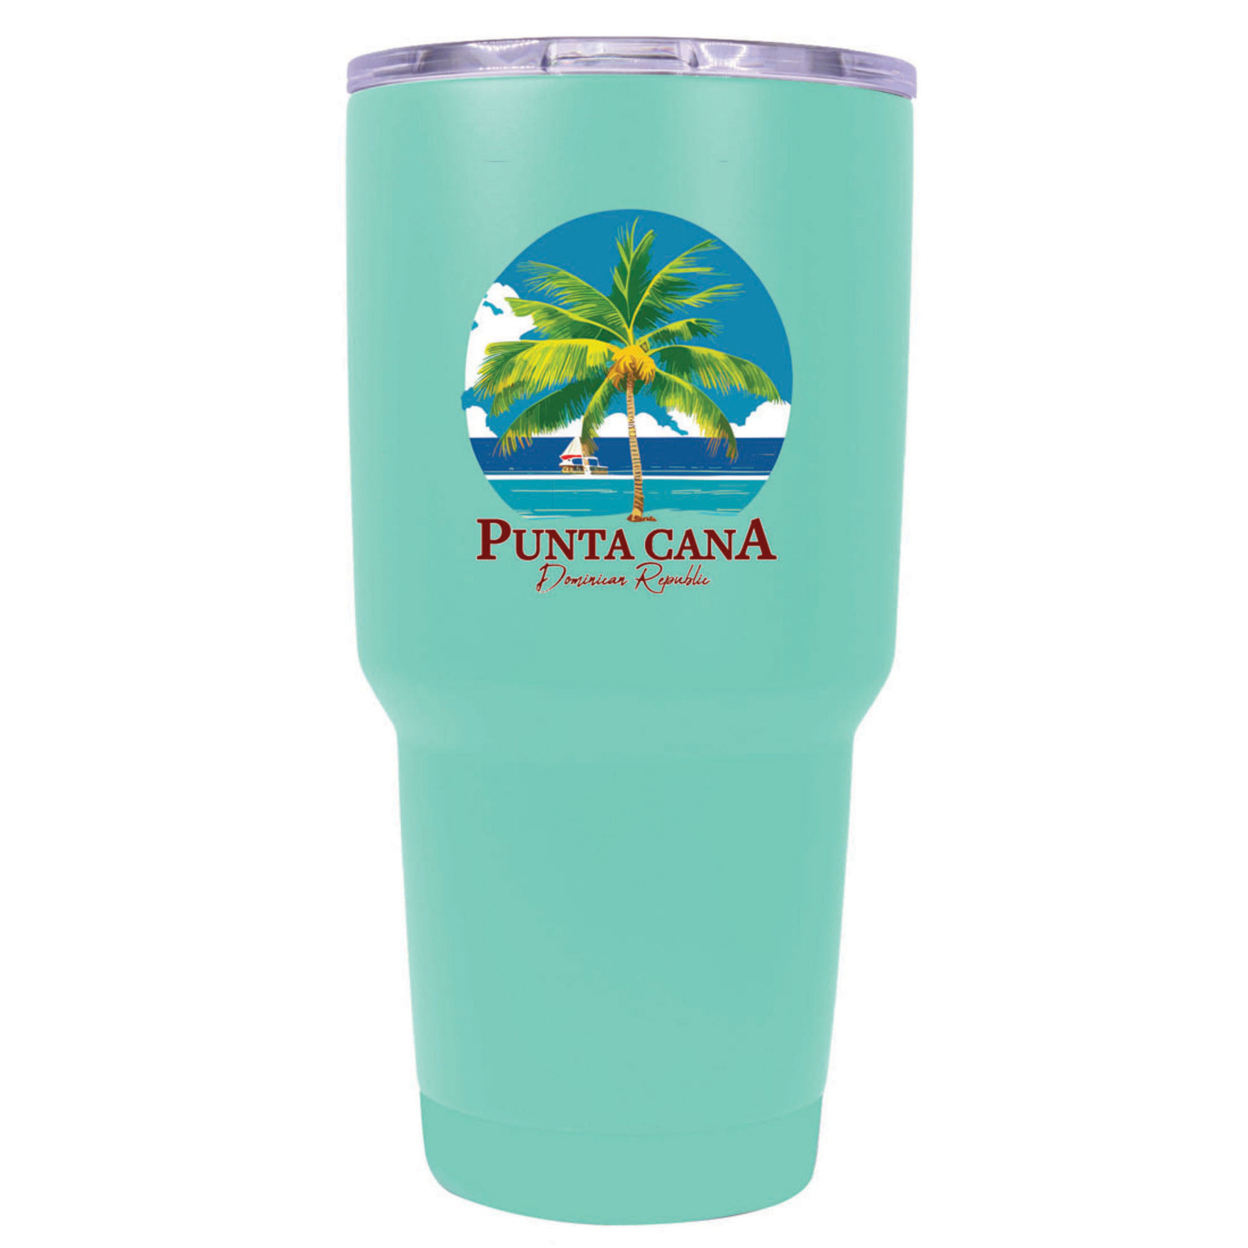 Punta Cana Dominican Republic Souvenir 24 Oz Insulated Stainless Steel Tumbler - Rose Gold, PALM